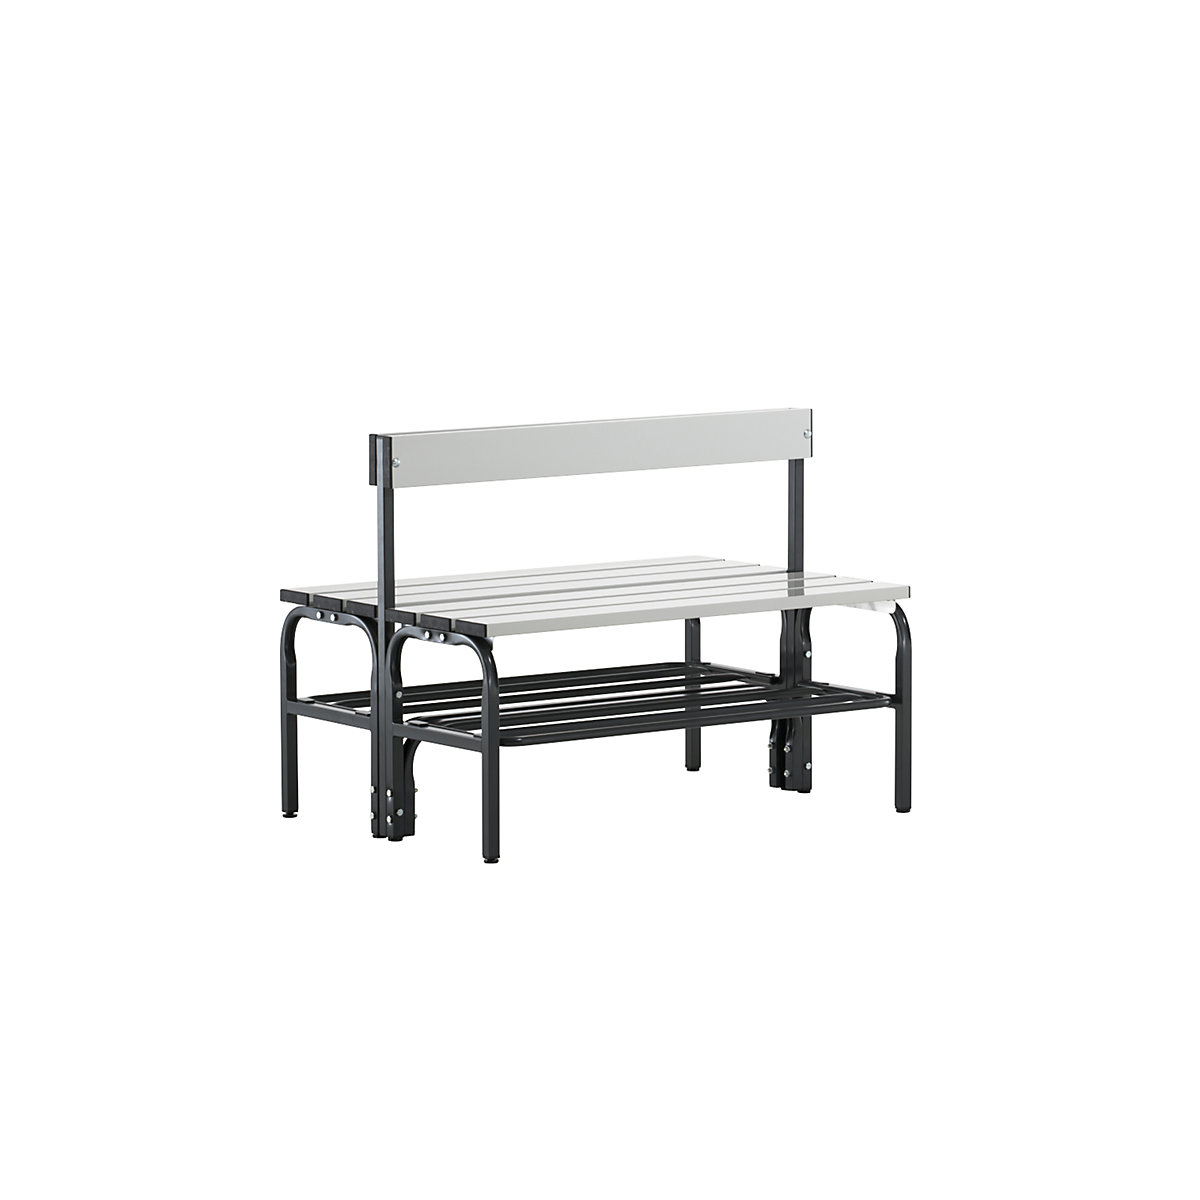 Half height cloakroom bench with back rest, double sided – Sypro, aluminium, length 1015 mm, charcoal, shoe rack